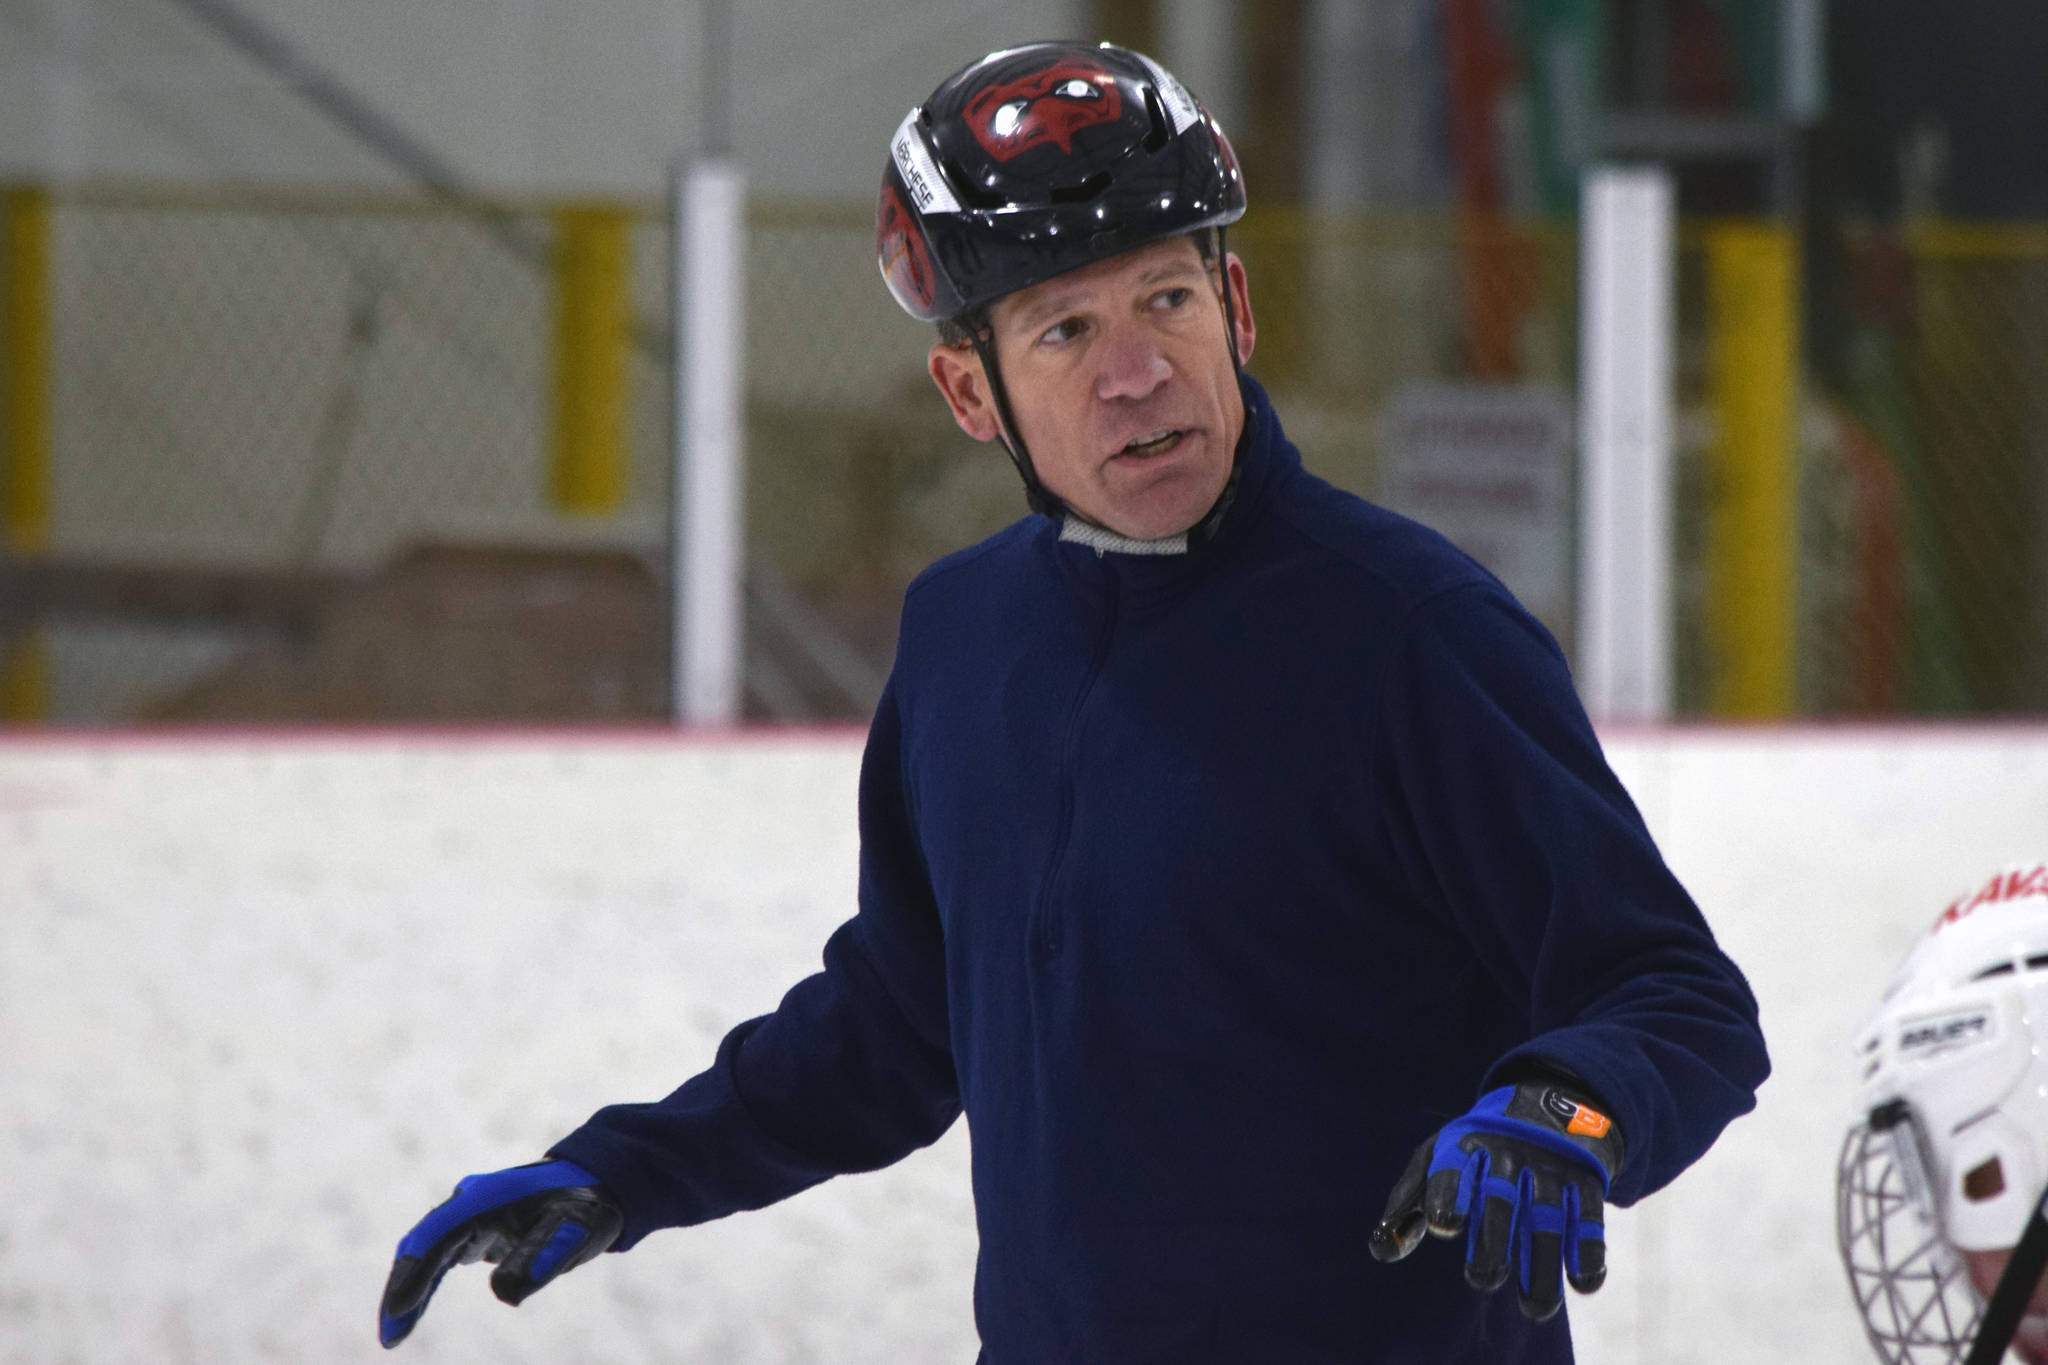 Michael Keye-Schuler leads a speed skating clinic at Treadwell Arena on Nov. 30, 2019. Keye-Schuler co-hosted Juneau’s first-ever short-track speed skating class with former competitive speed skater Andrew Dyke on Nov. 24, 30 and Dec. 1. (Nolin Ainsworth | Juneau Empire)